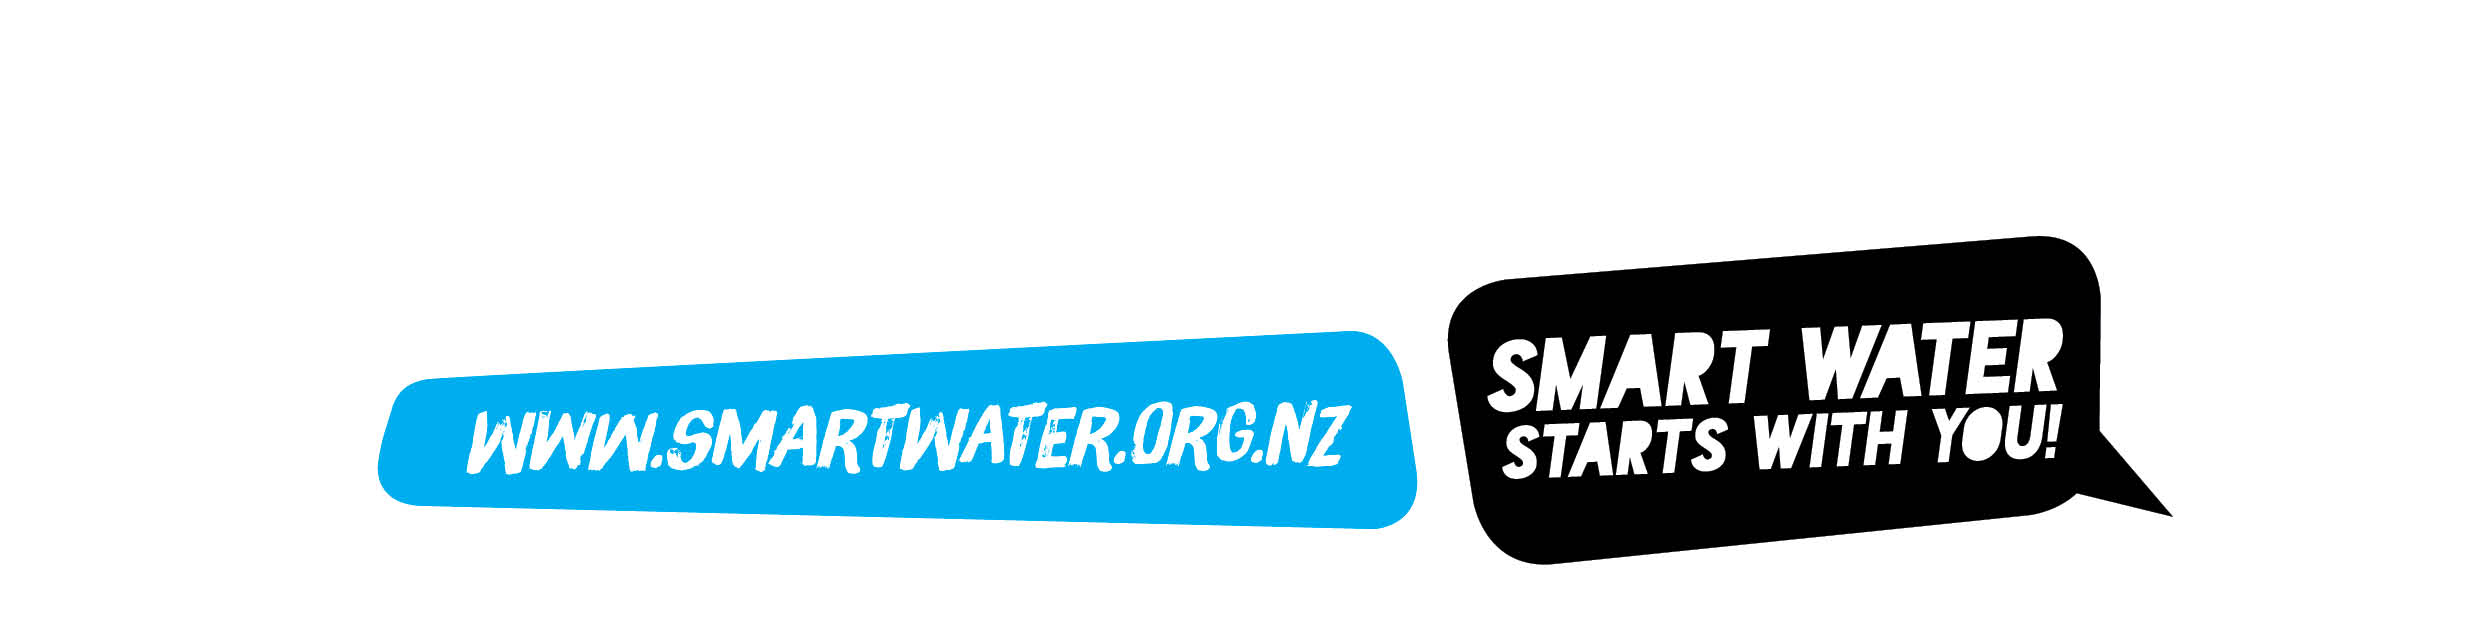 Learn more at www.smartwater.org.nz